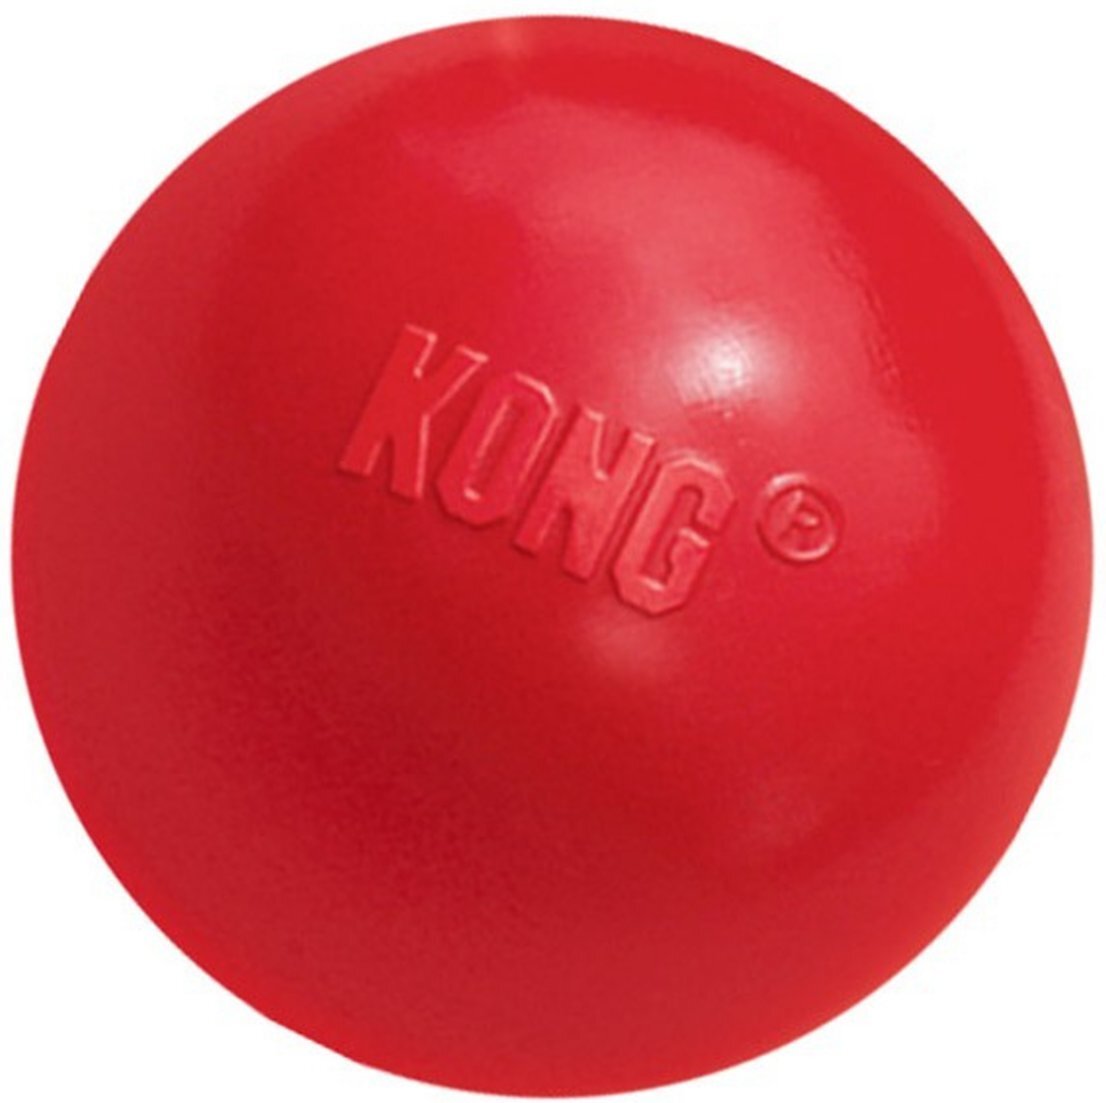 chewy kong toys